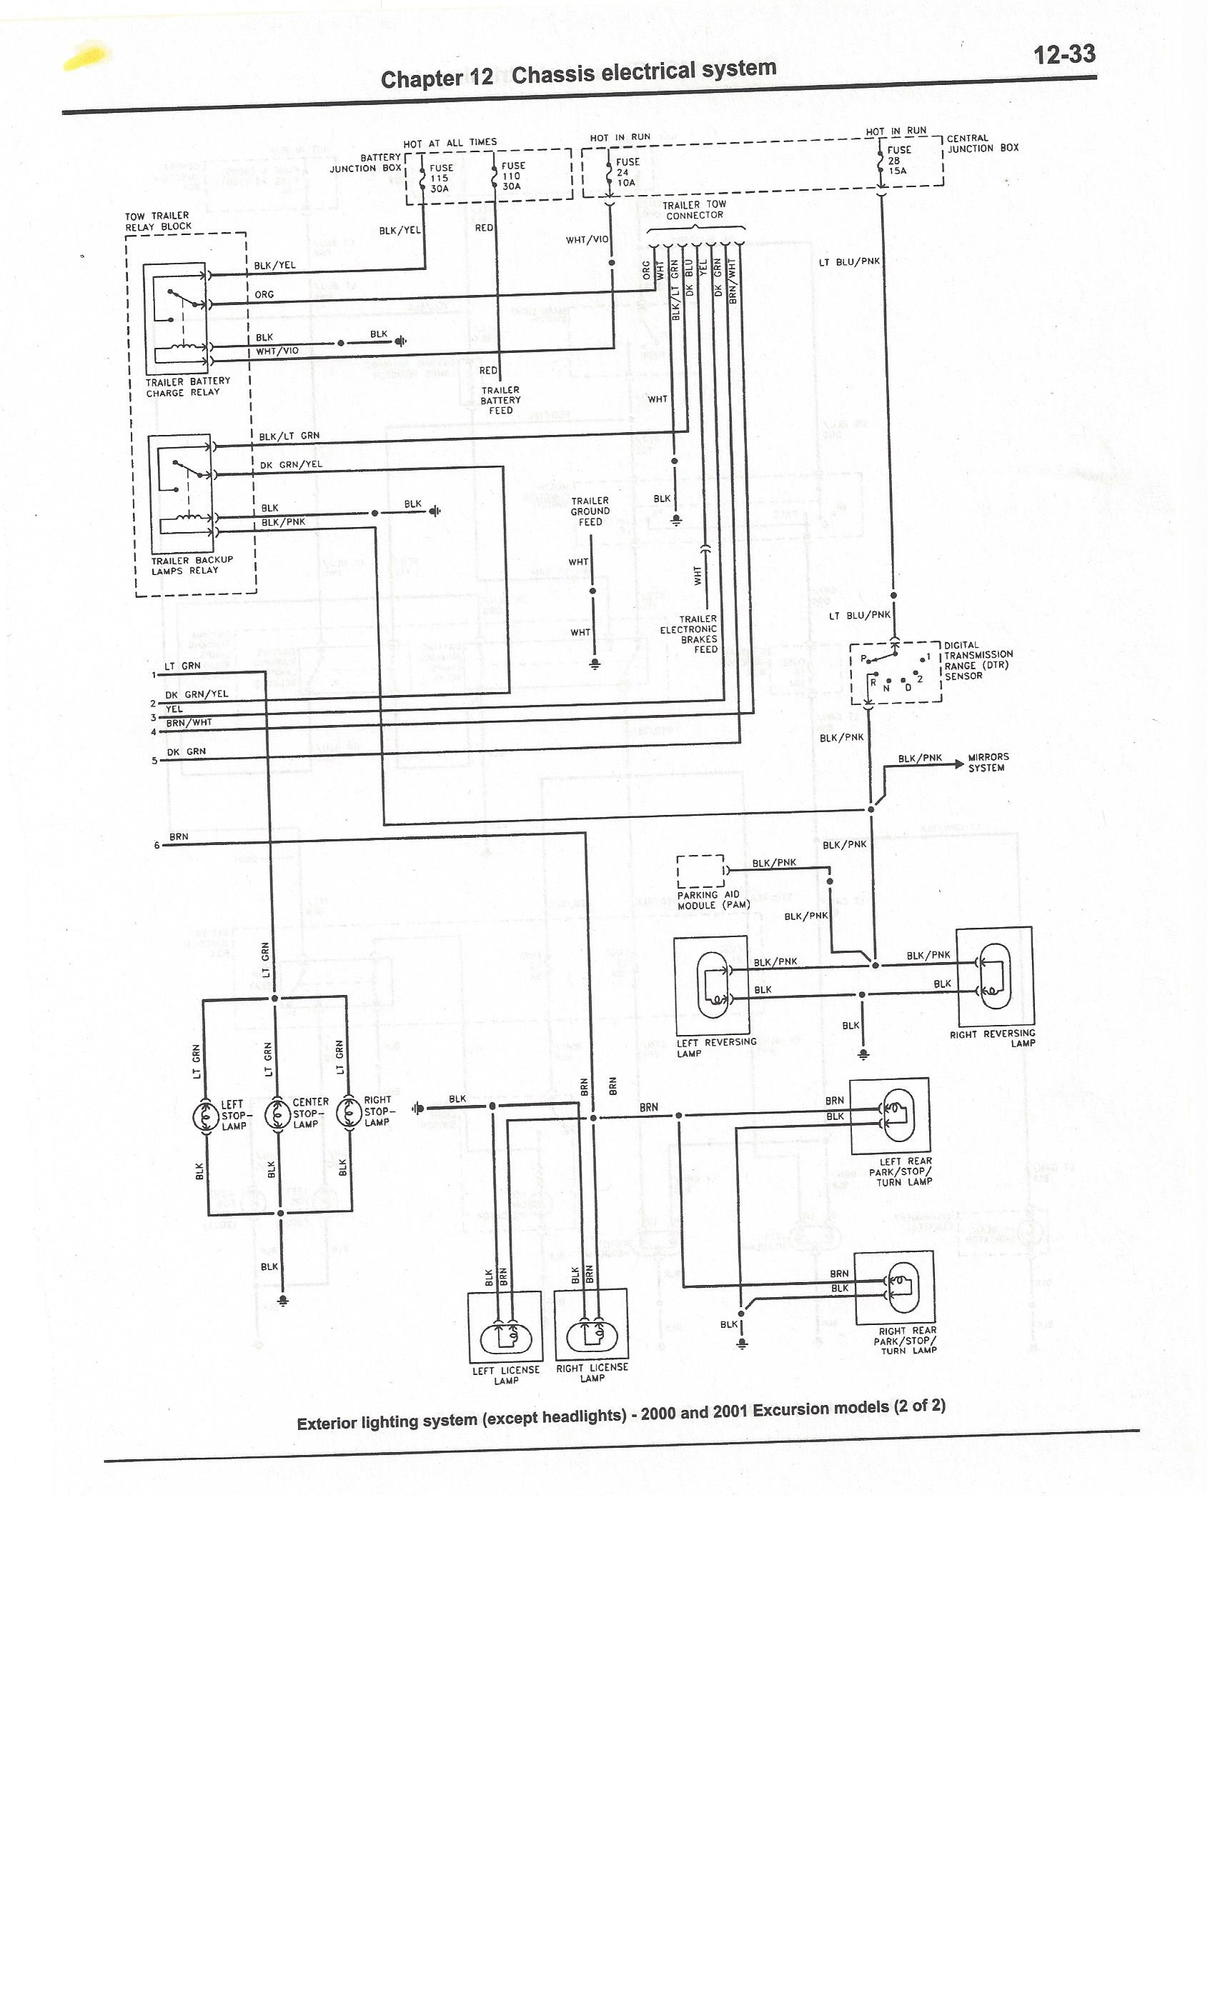 Wiring Schematic For 2000 Ford Excursion - 2002 Ford Excursion Wiring